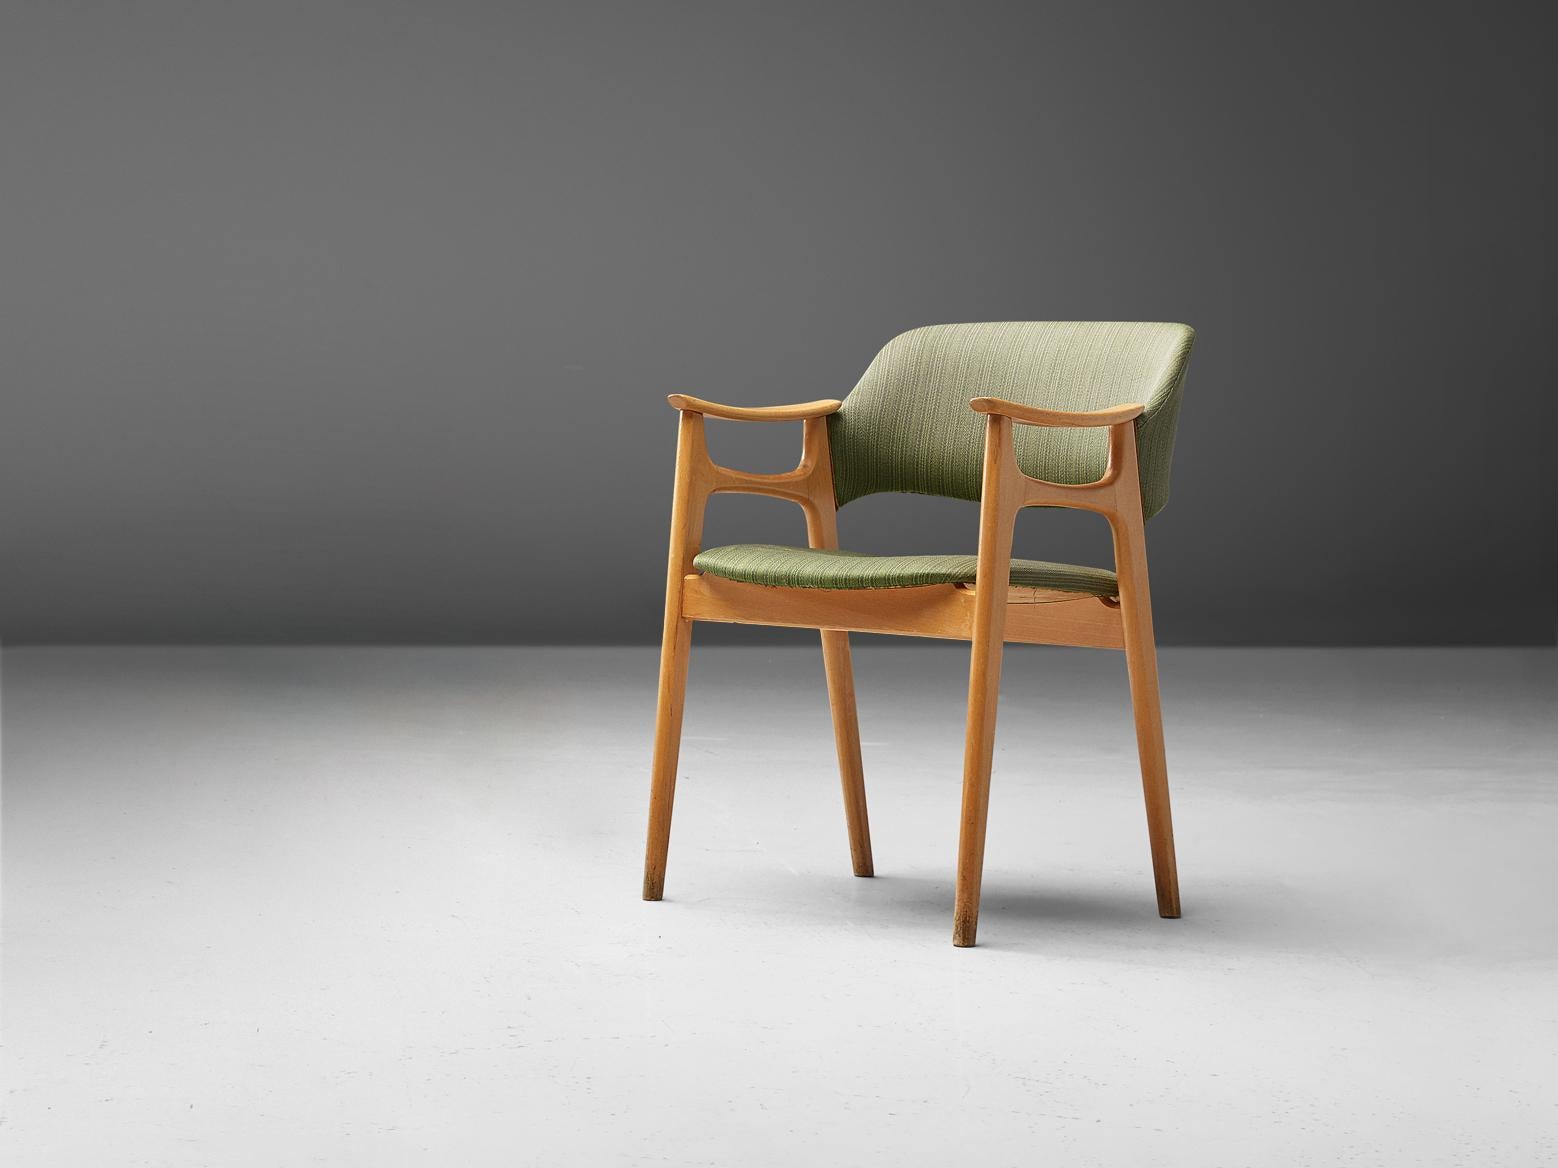 Dining chairs, beech, fabric, Norway, 1960s

This Norwegian elegant dining chairs show beautiful lines and stunning wood connections. The visually almost floating seat with the well sized back, provide great comfort. The natural grain of the beech